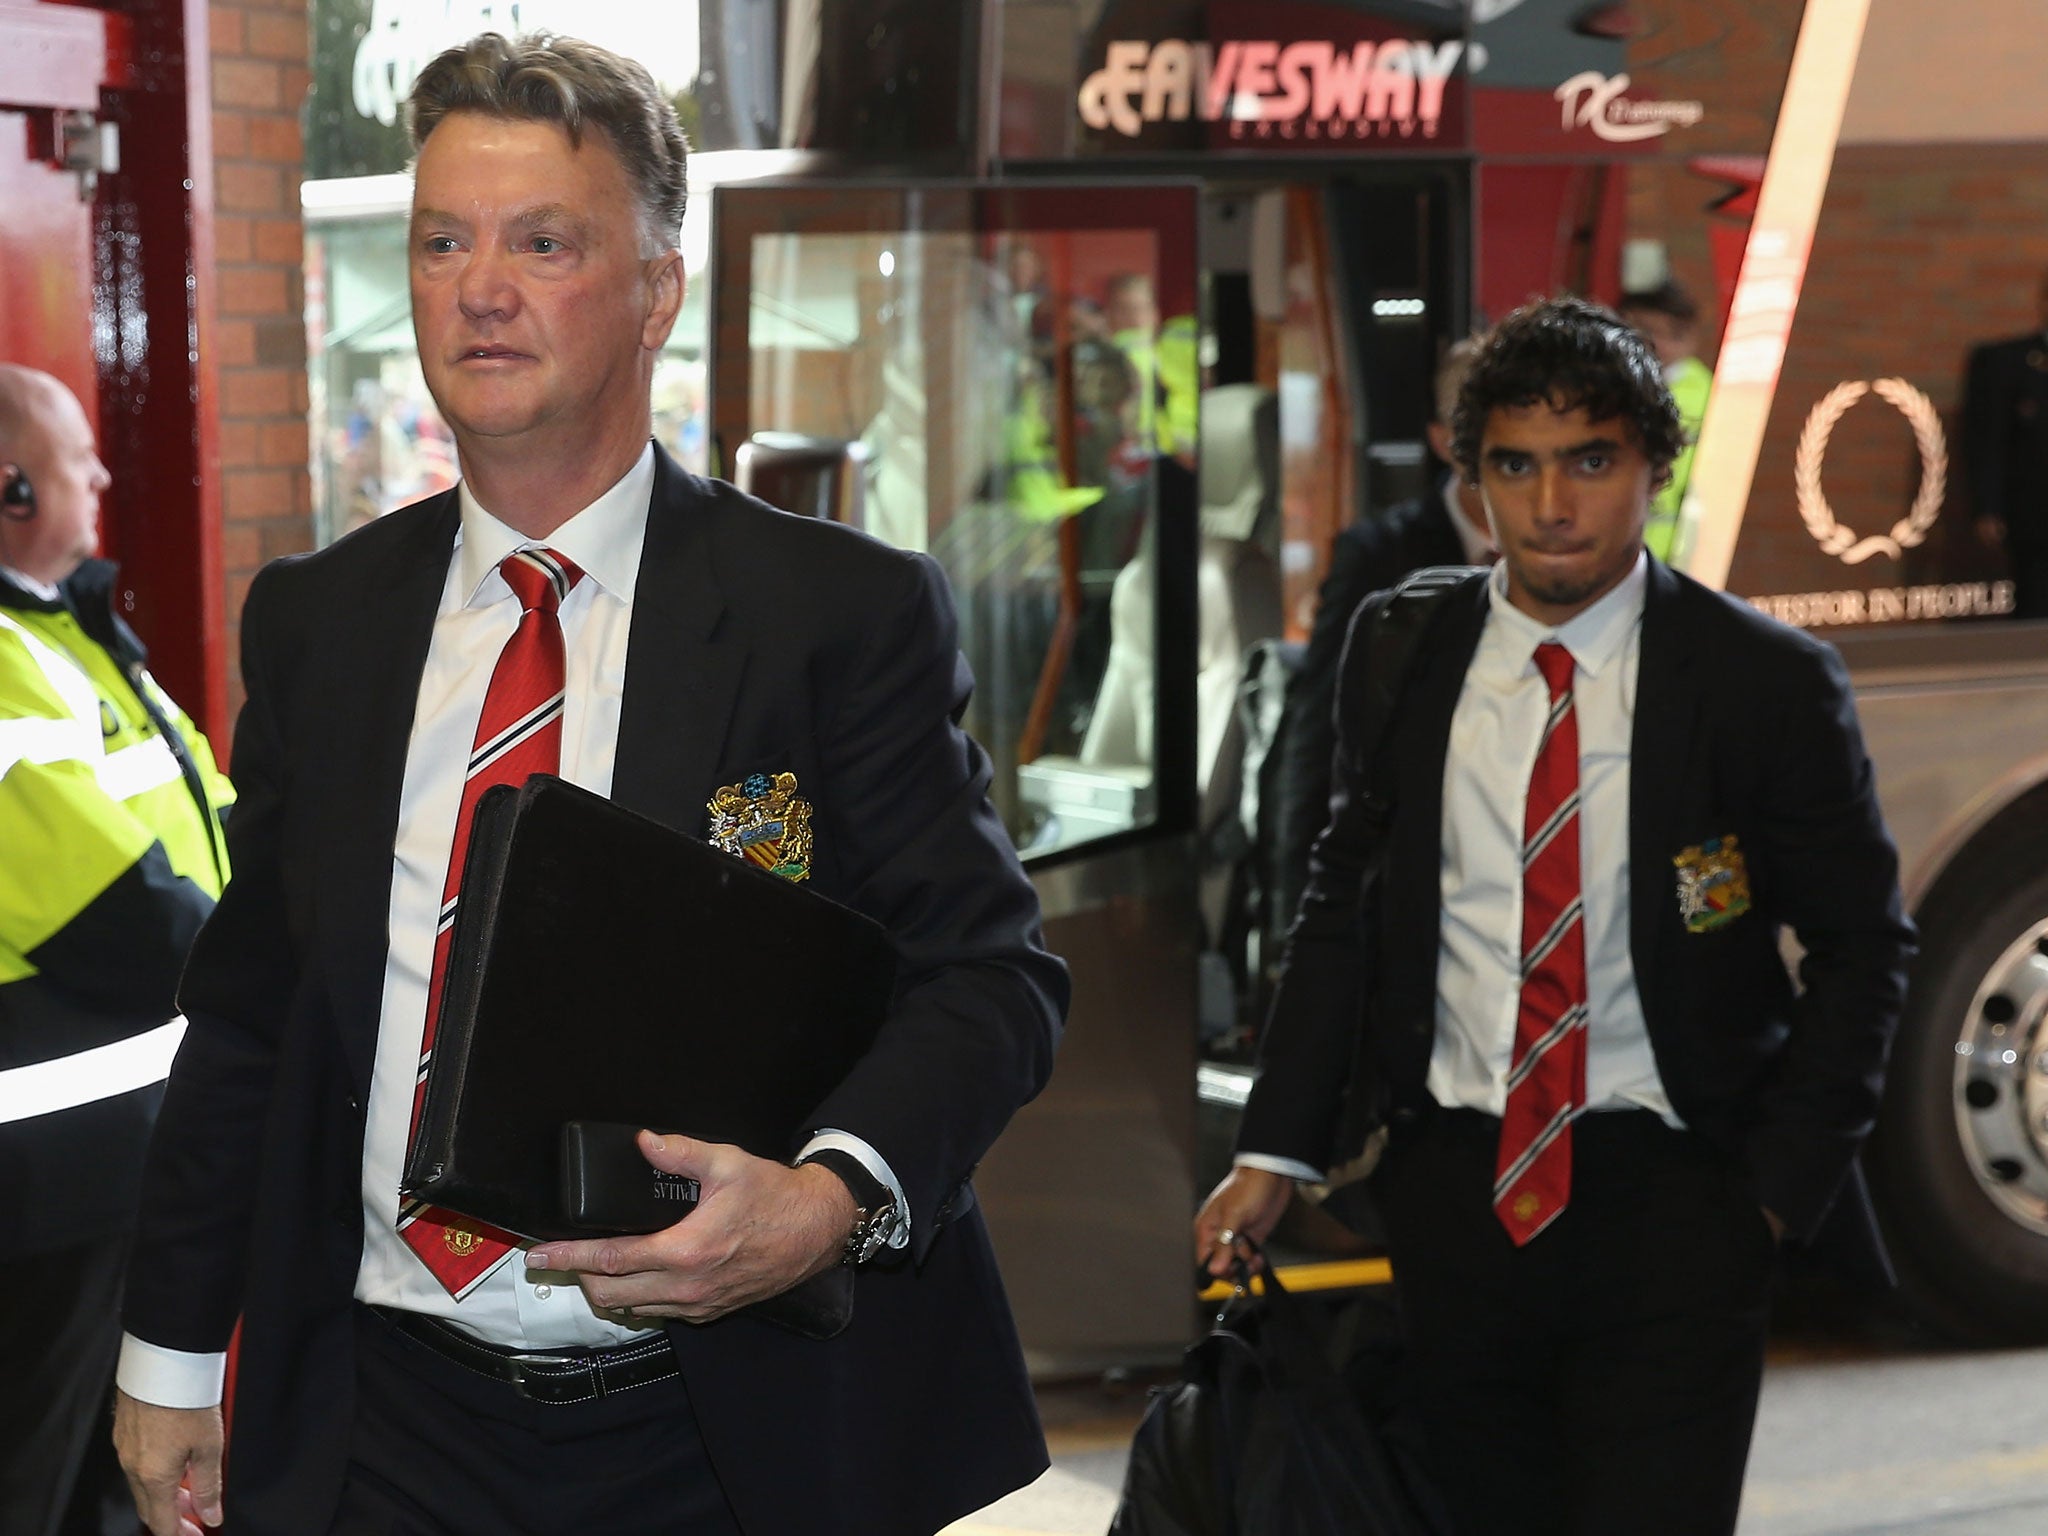 Manchester United manager Louis van Gaal and former defender Rafael